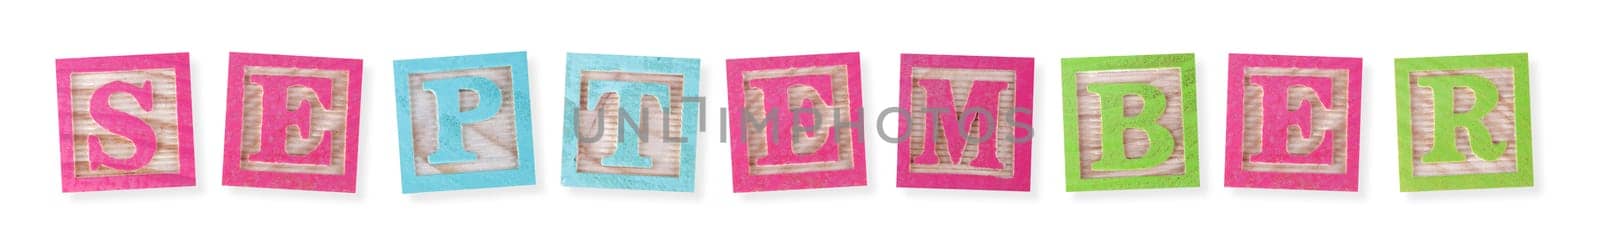 A September concept with childs wood blocks on white with clipping path to remove shadow